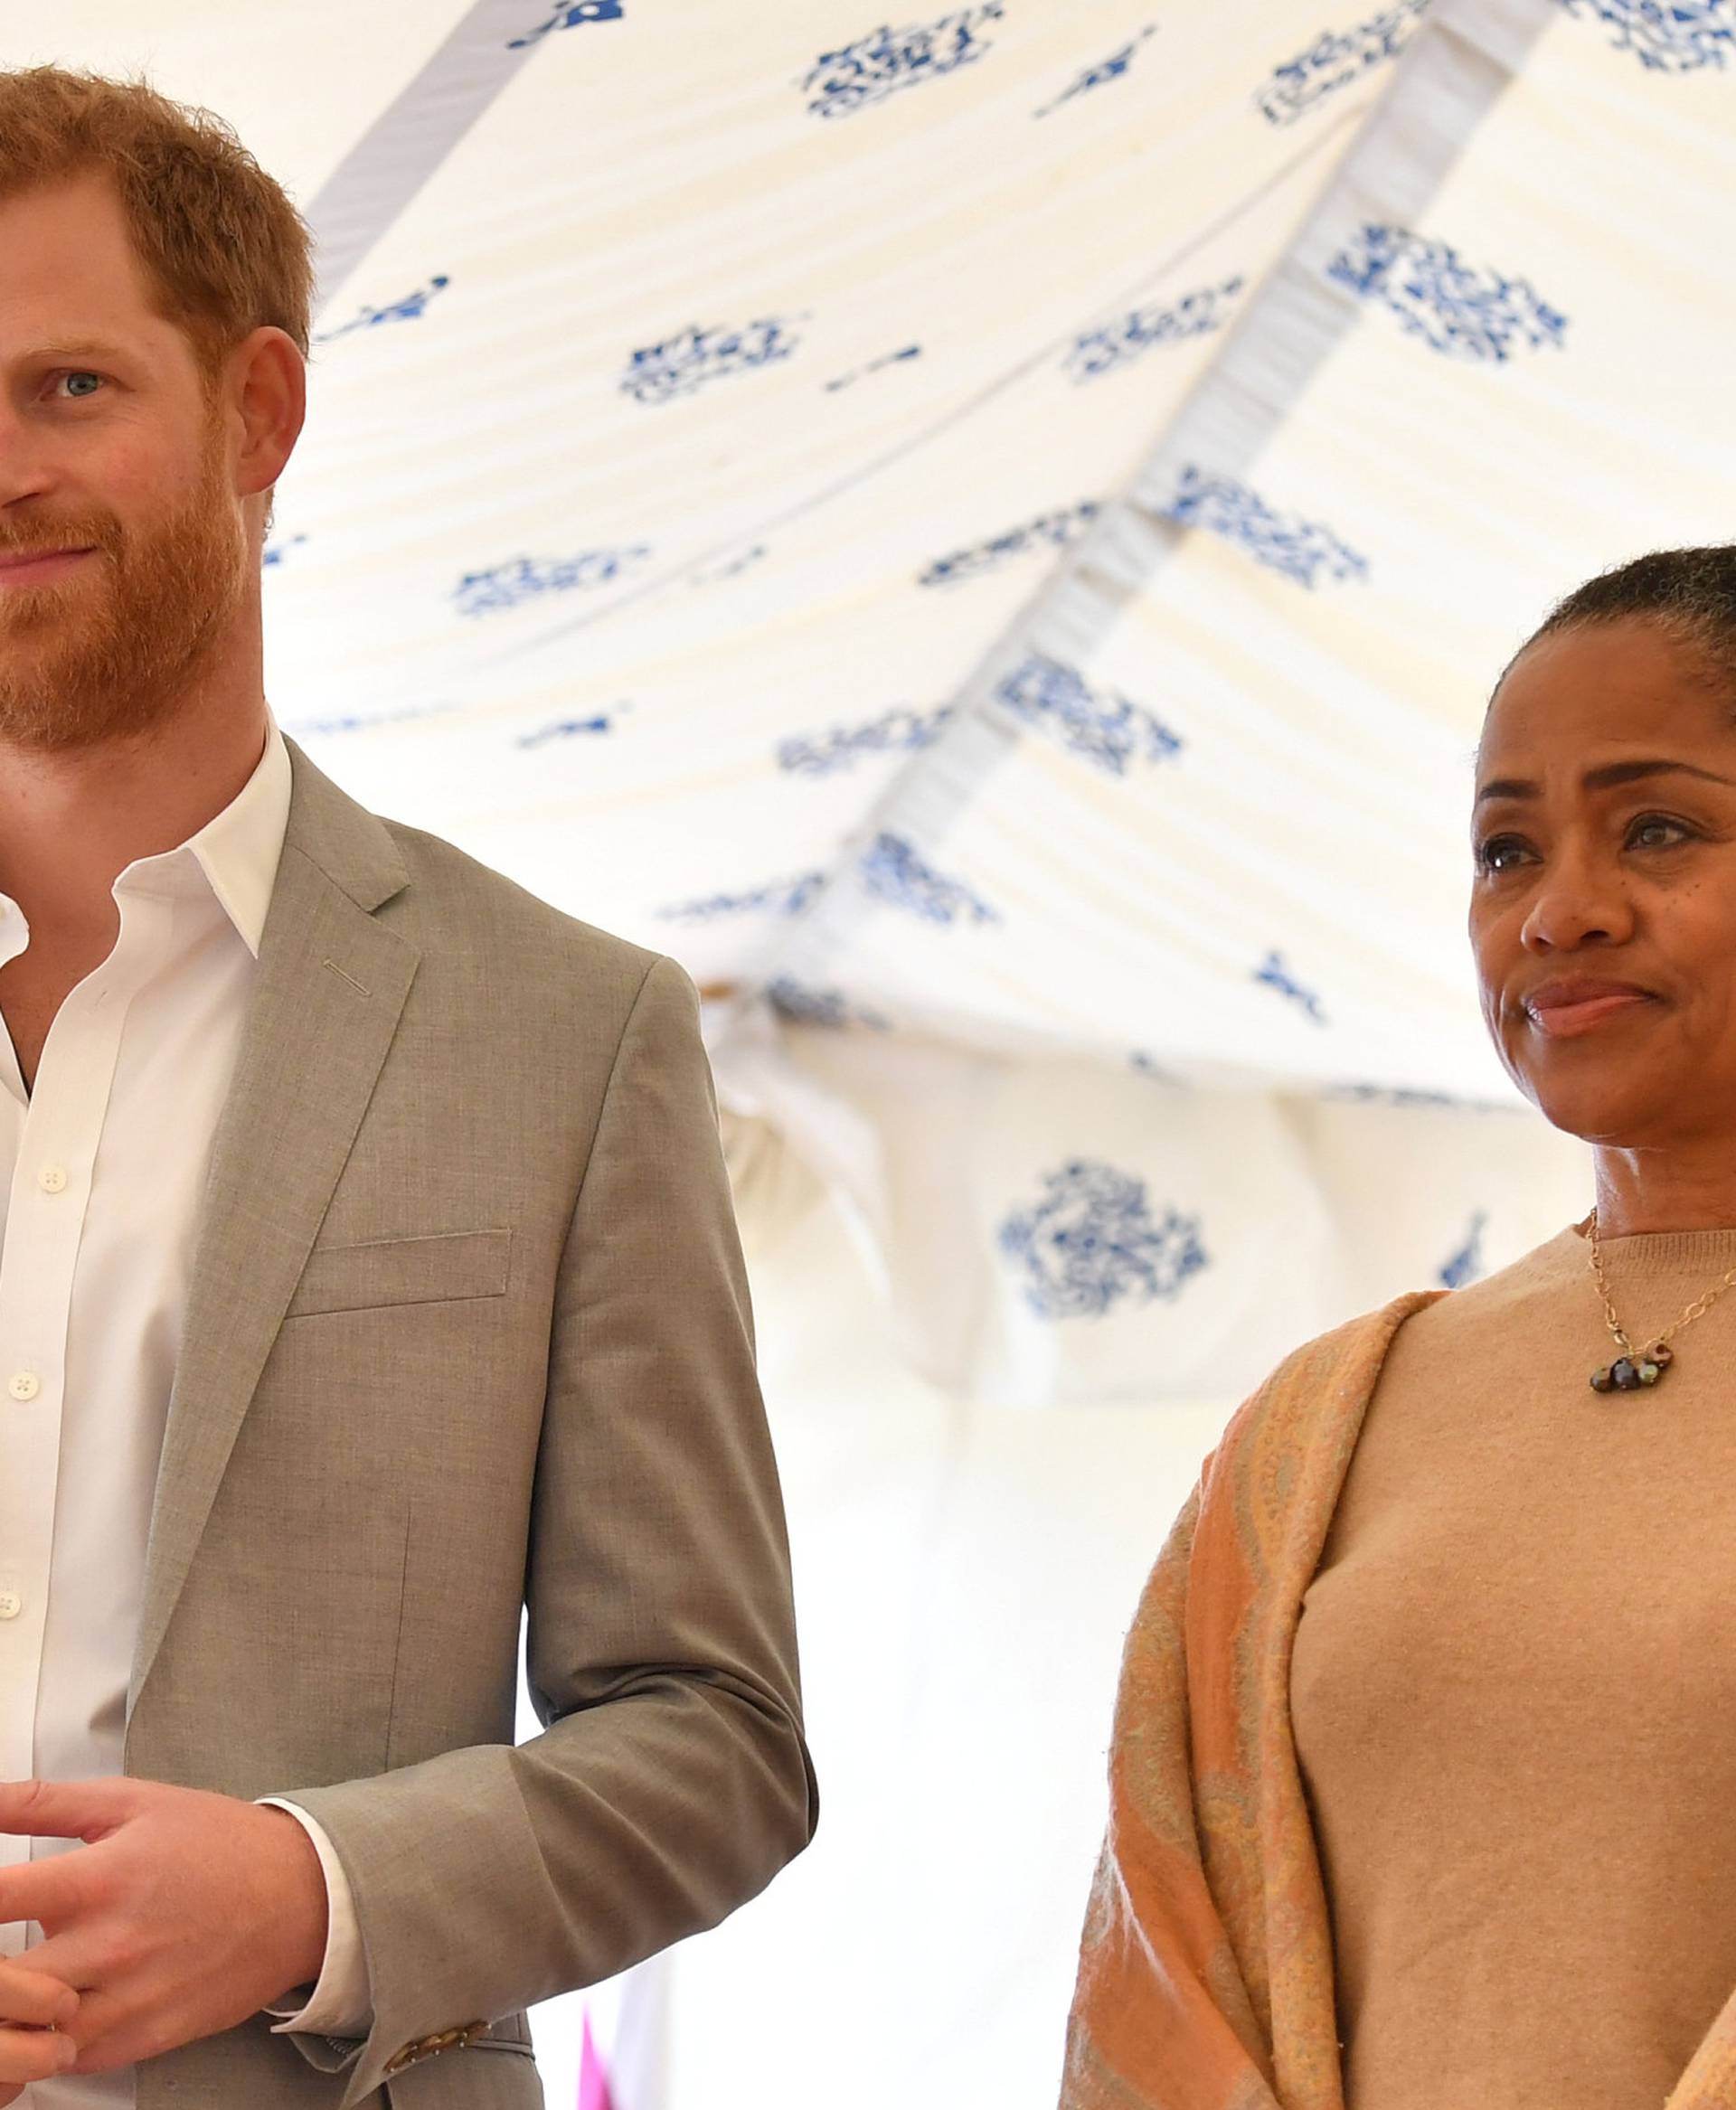 Britain's Prince Harry, and Doria Ragland listen to Meghan, Duchess of Sussex speaking at the launch of a cookbook with recipes from a group of women affected by the Grenfell Tower fire at Kensington Palace in London